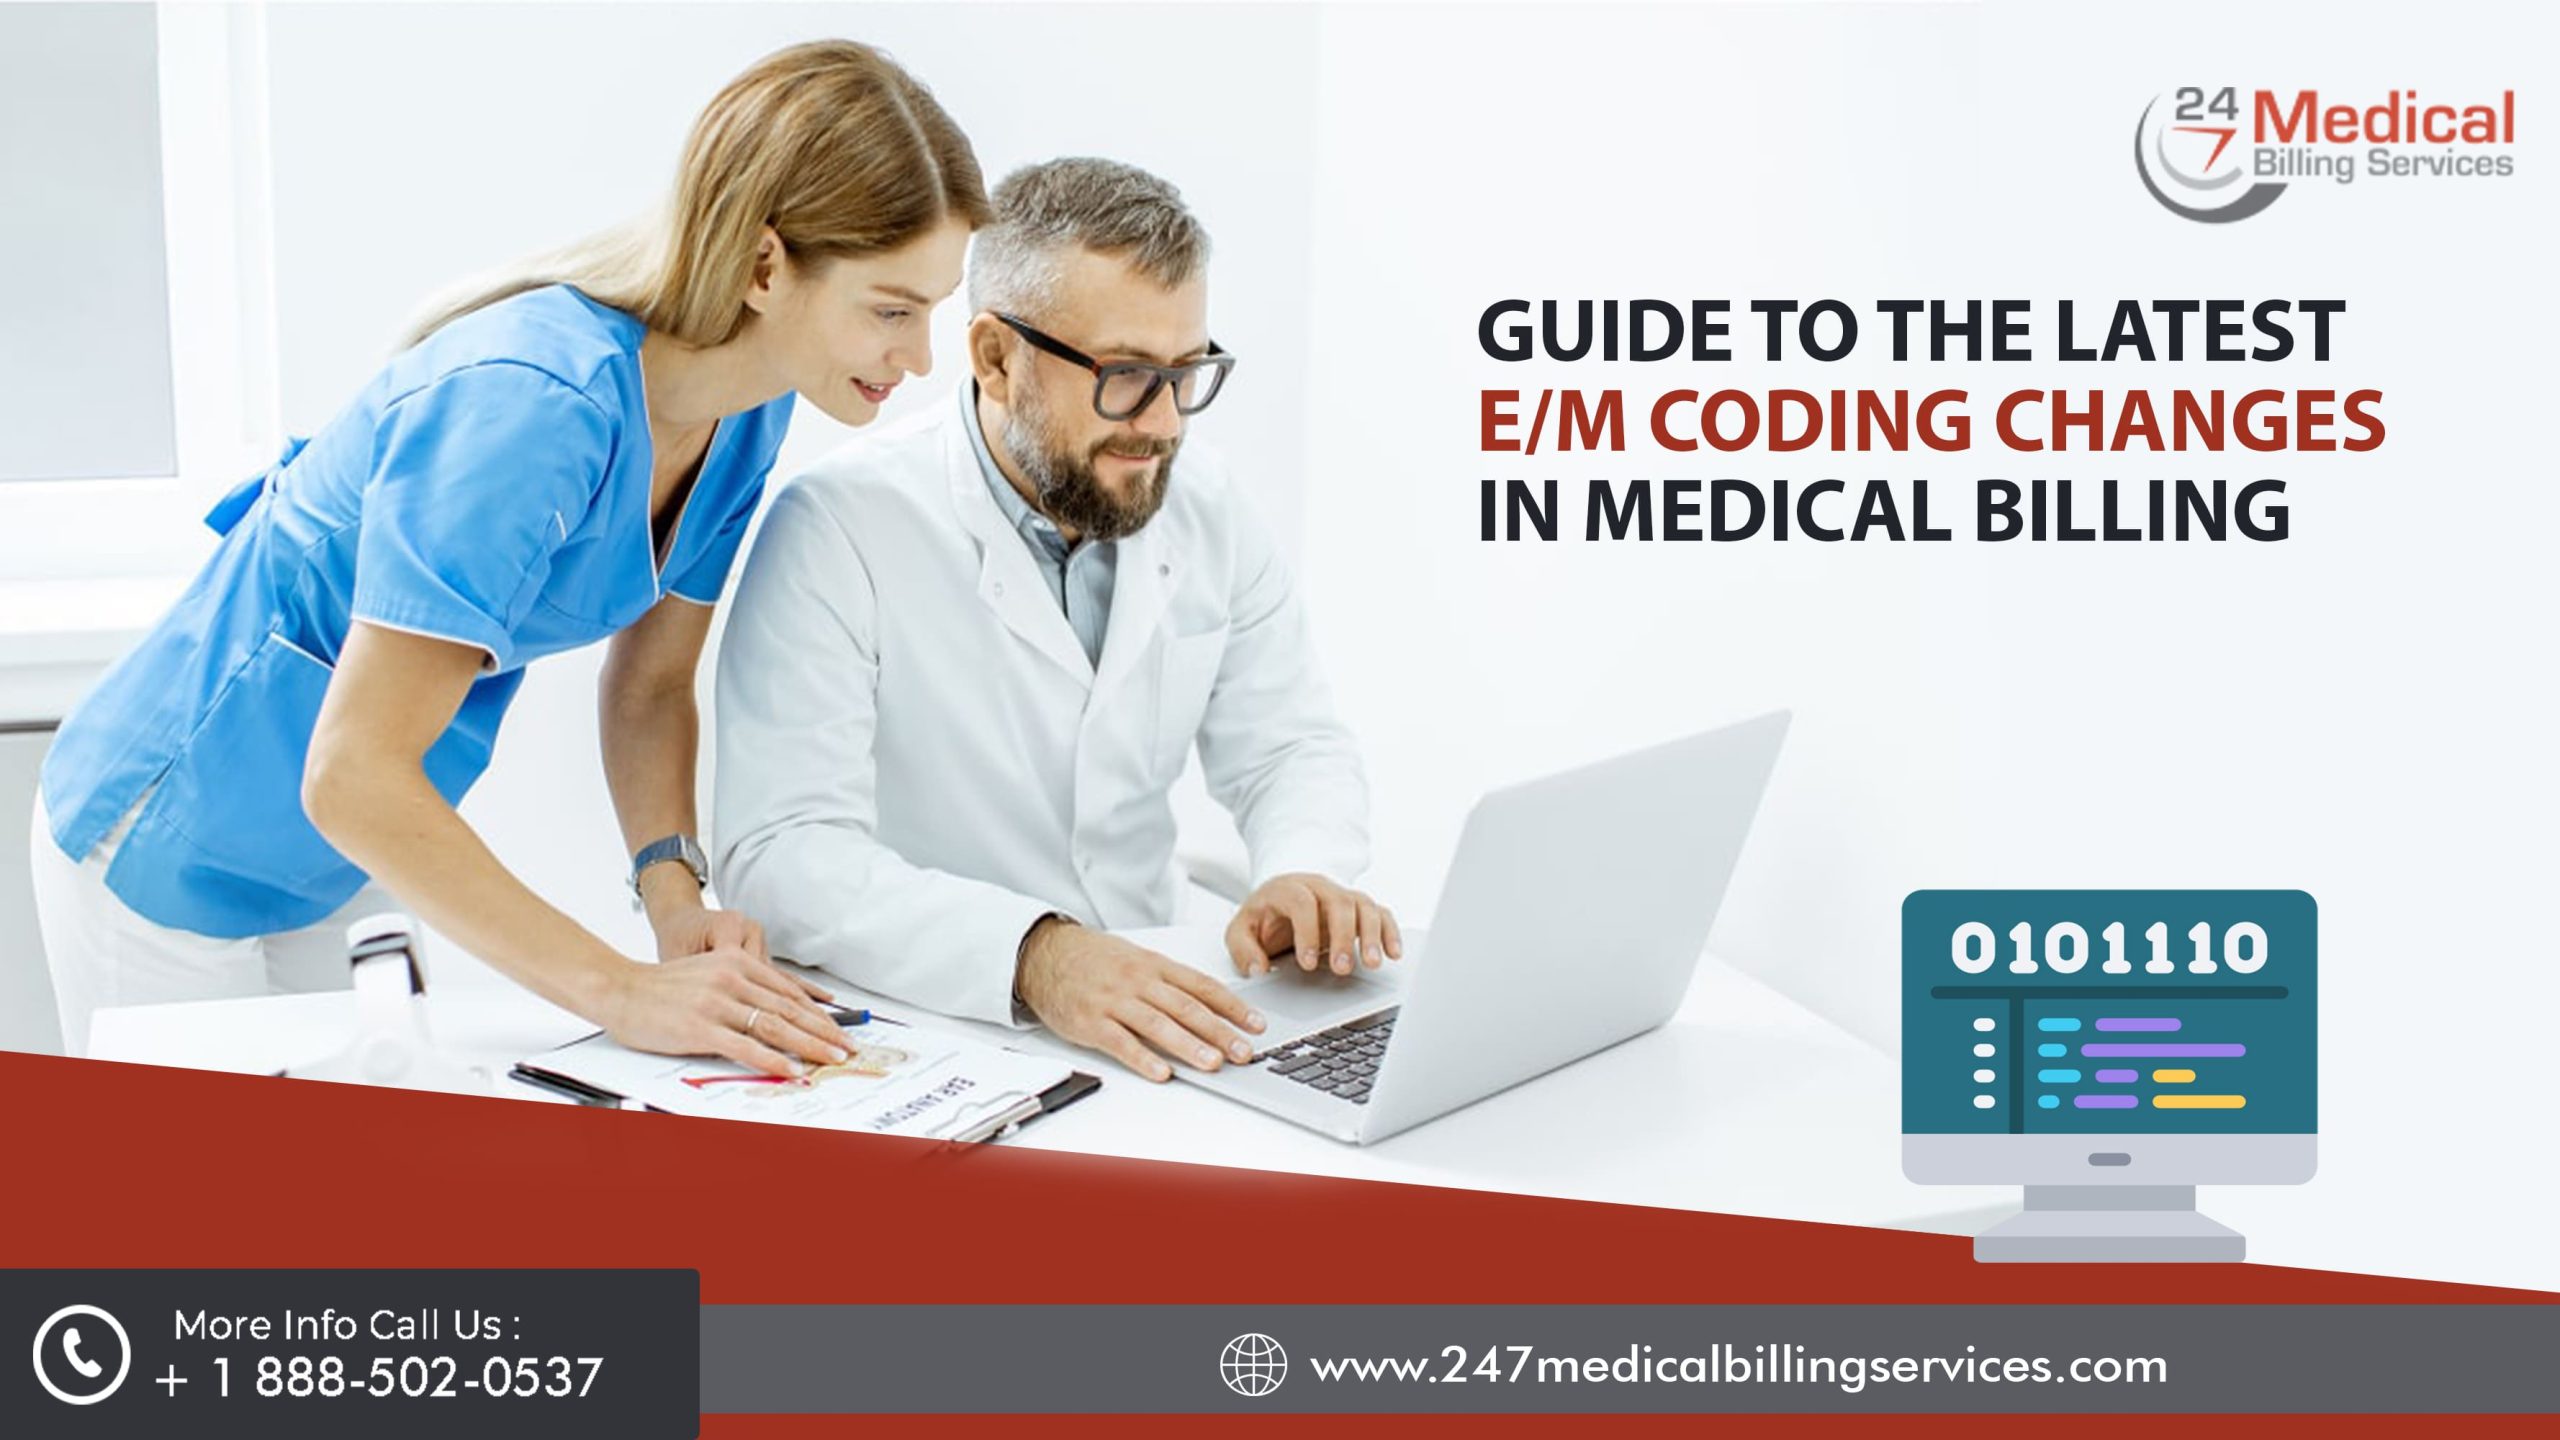  Guide to the Latest E/M Coding Changes in Medical Billing